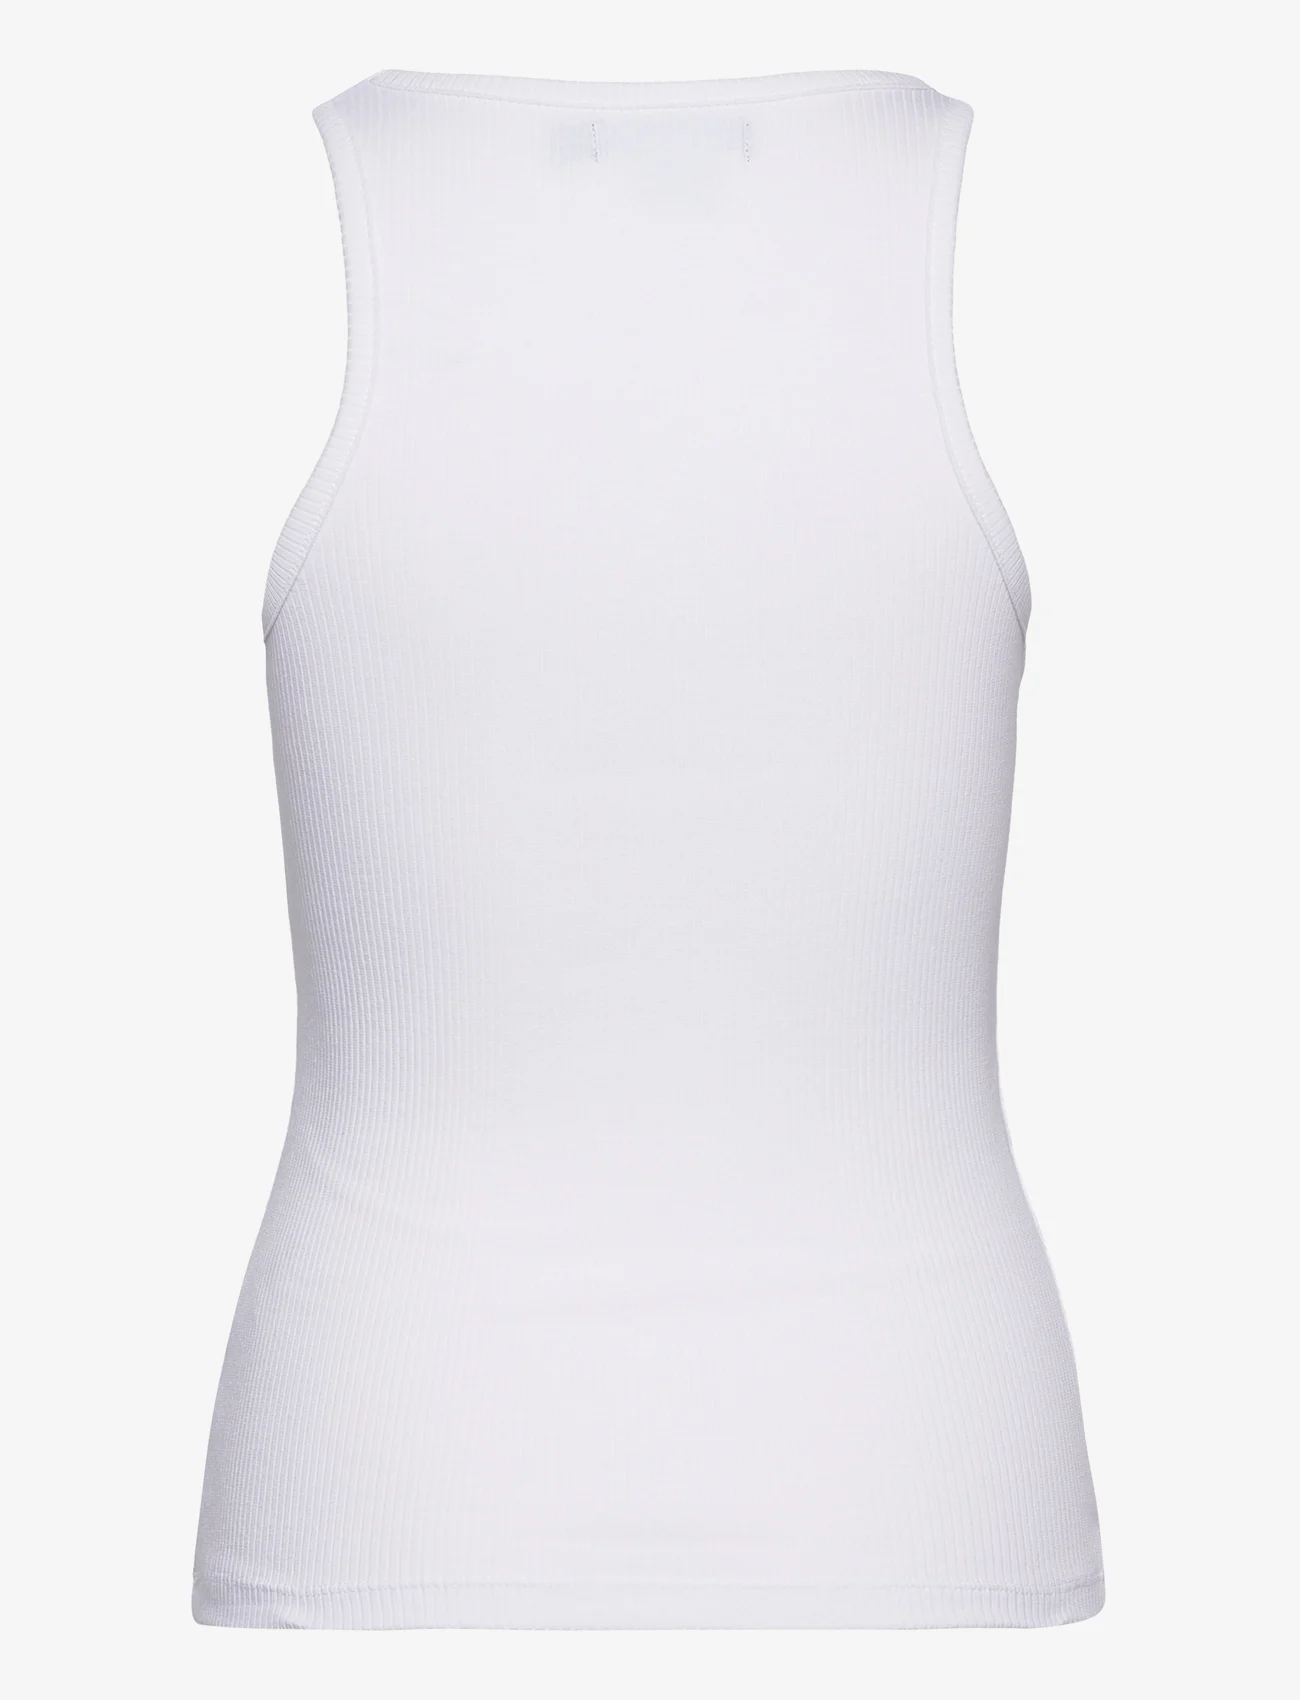 French Connection - RACER VEST - Ärmellose tops - white - 1